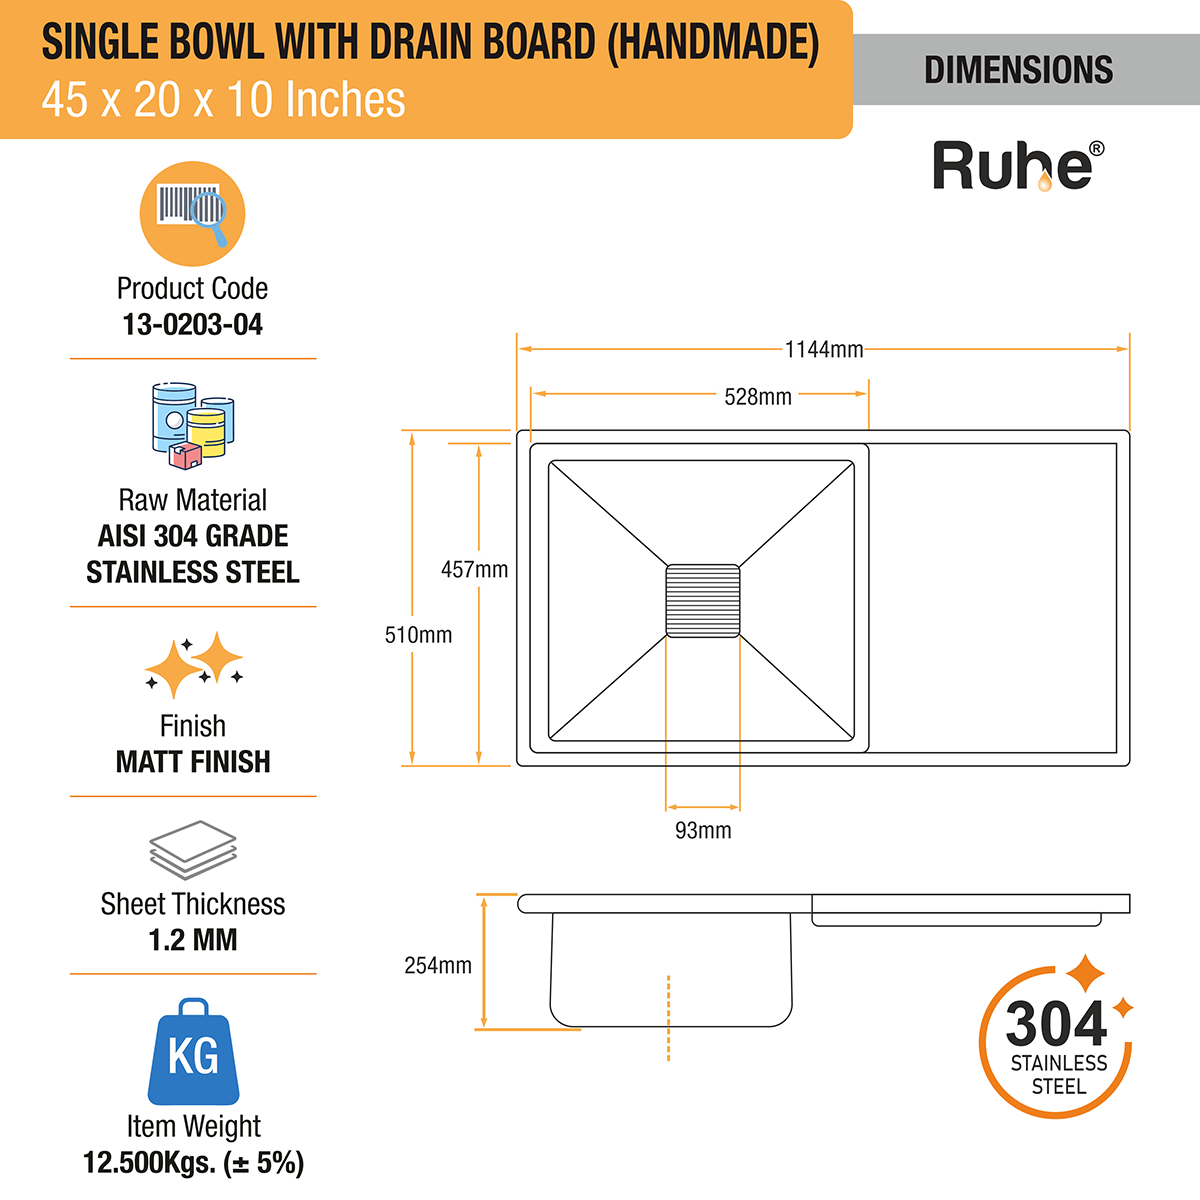 Handmade Single Bowl with Drainboard 304-Grade Kitchen Sink (45 x 20 x 10 Inches) dimensions and sizes